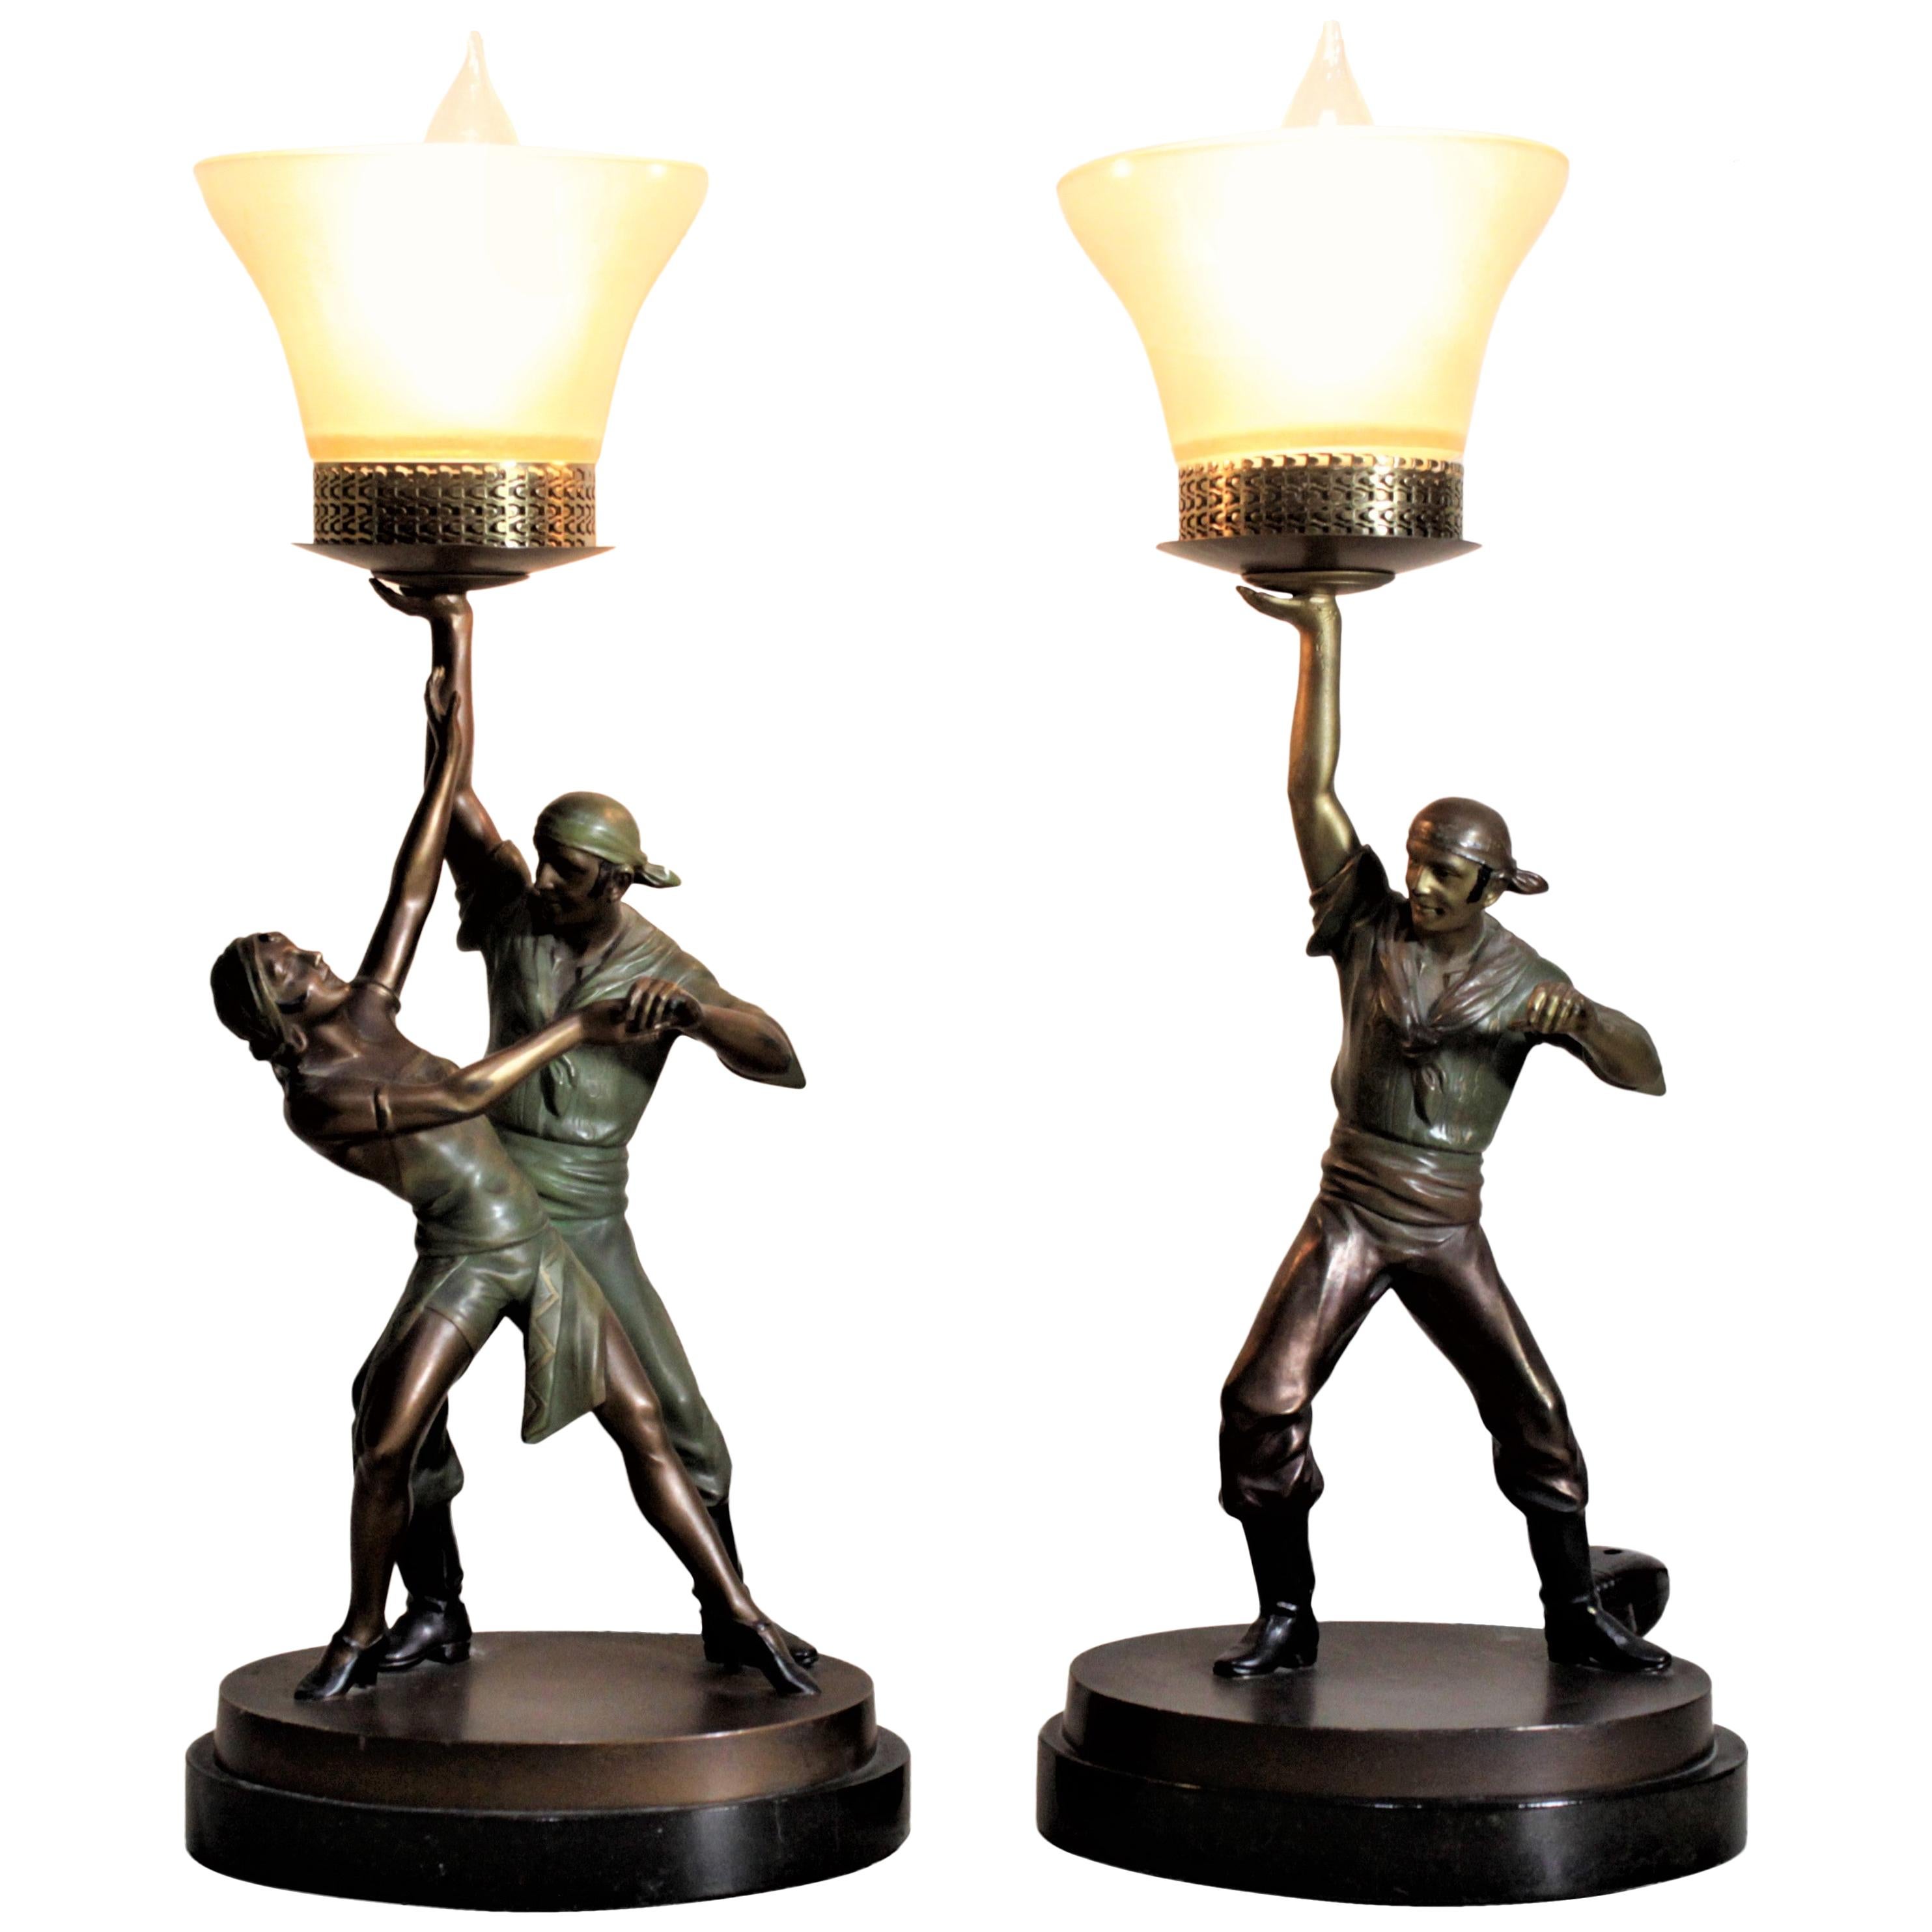 Pair of Art Deco Cast and Cold-Painted Figural Theatrical Pirate Table Lamps